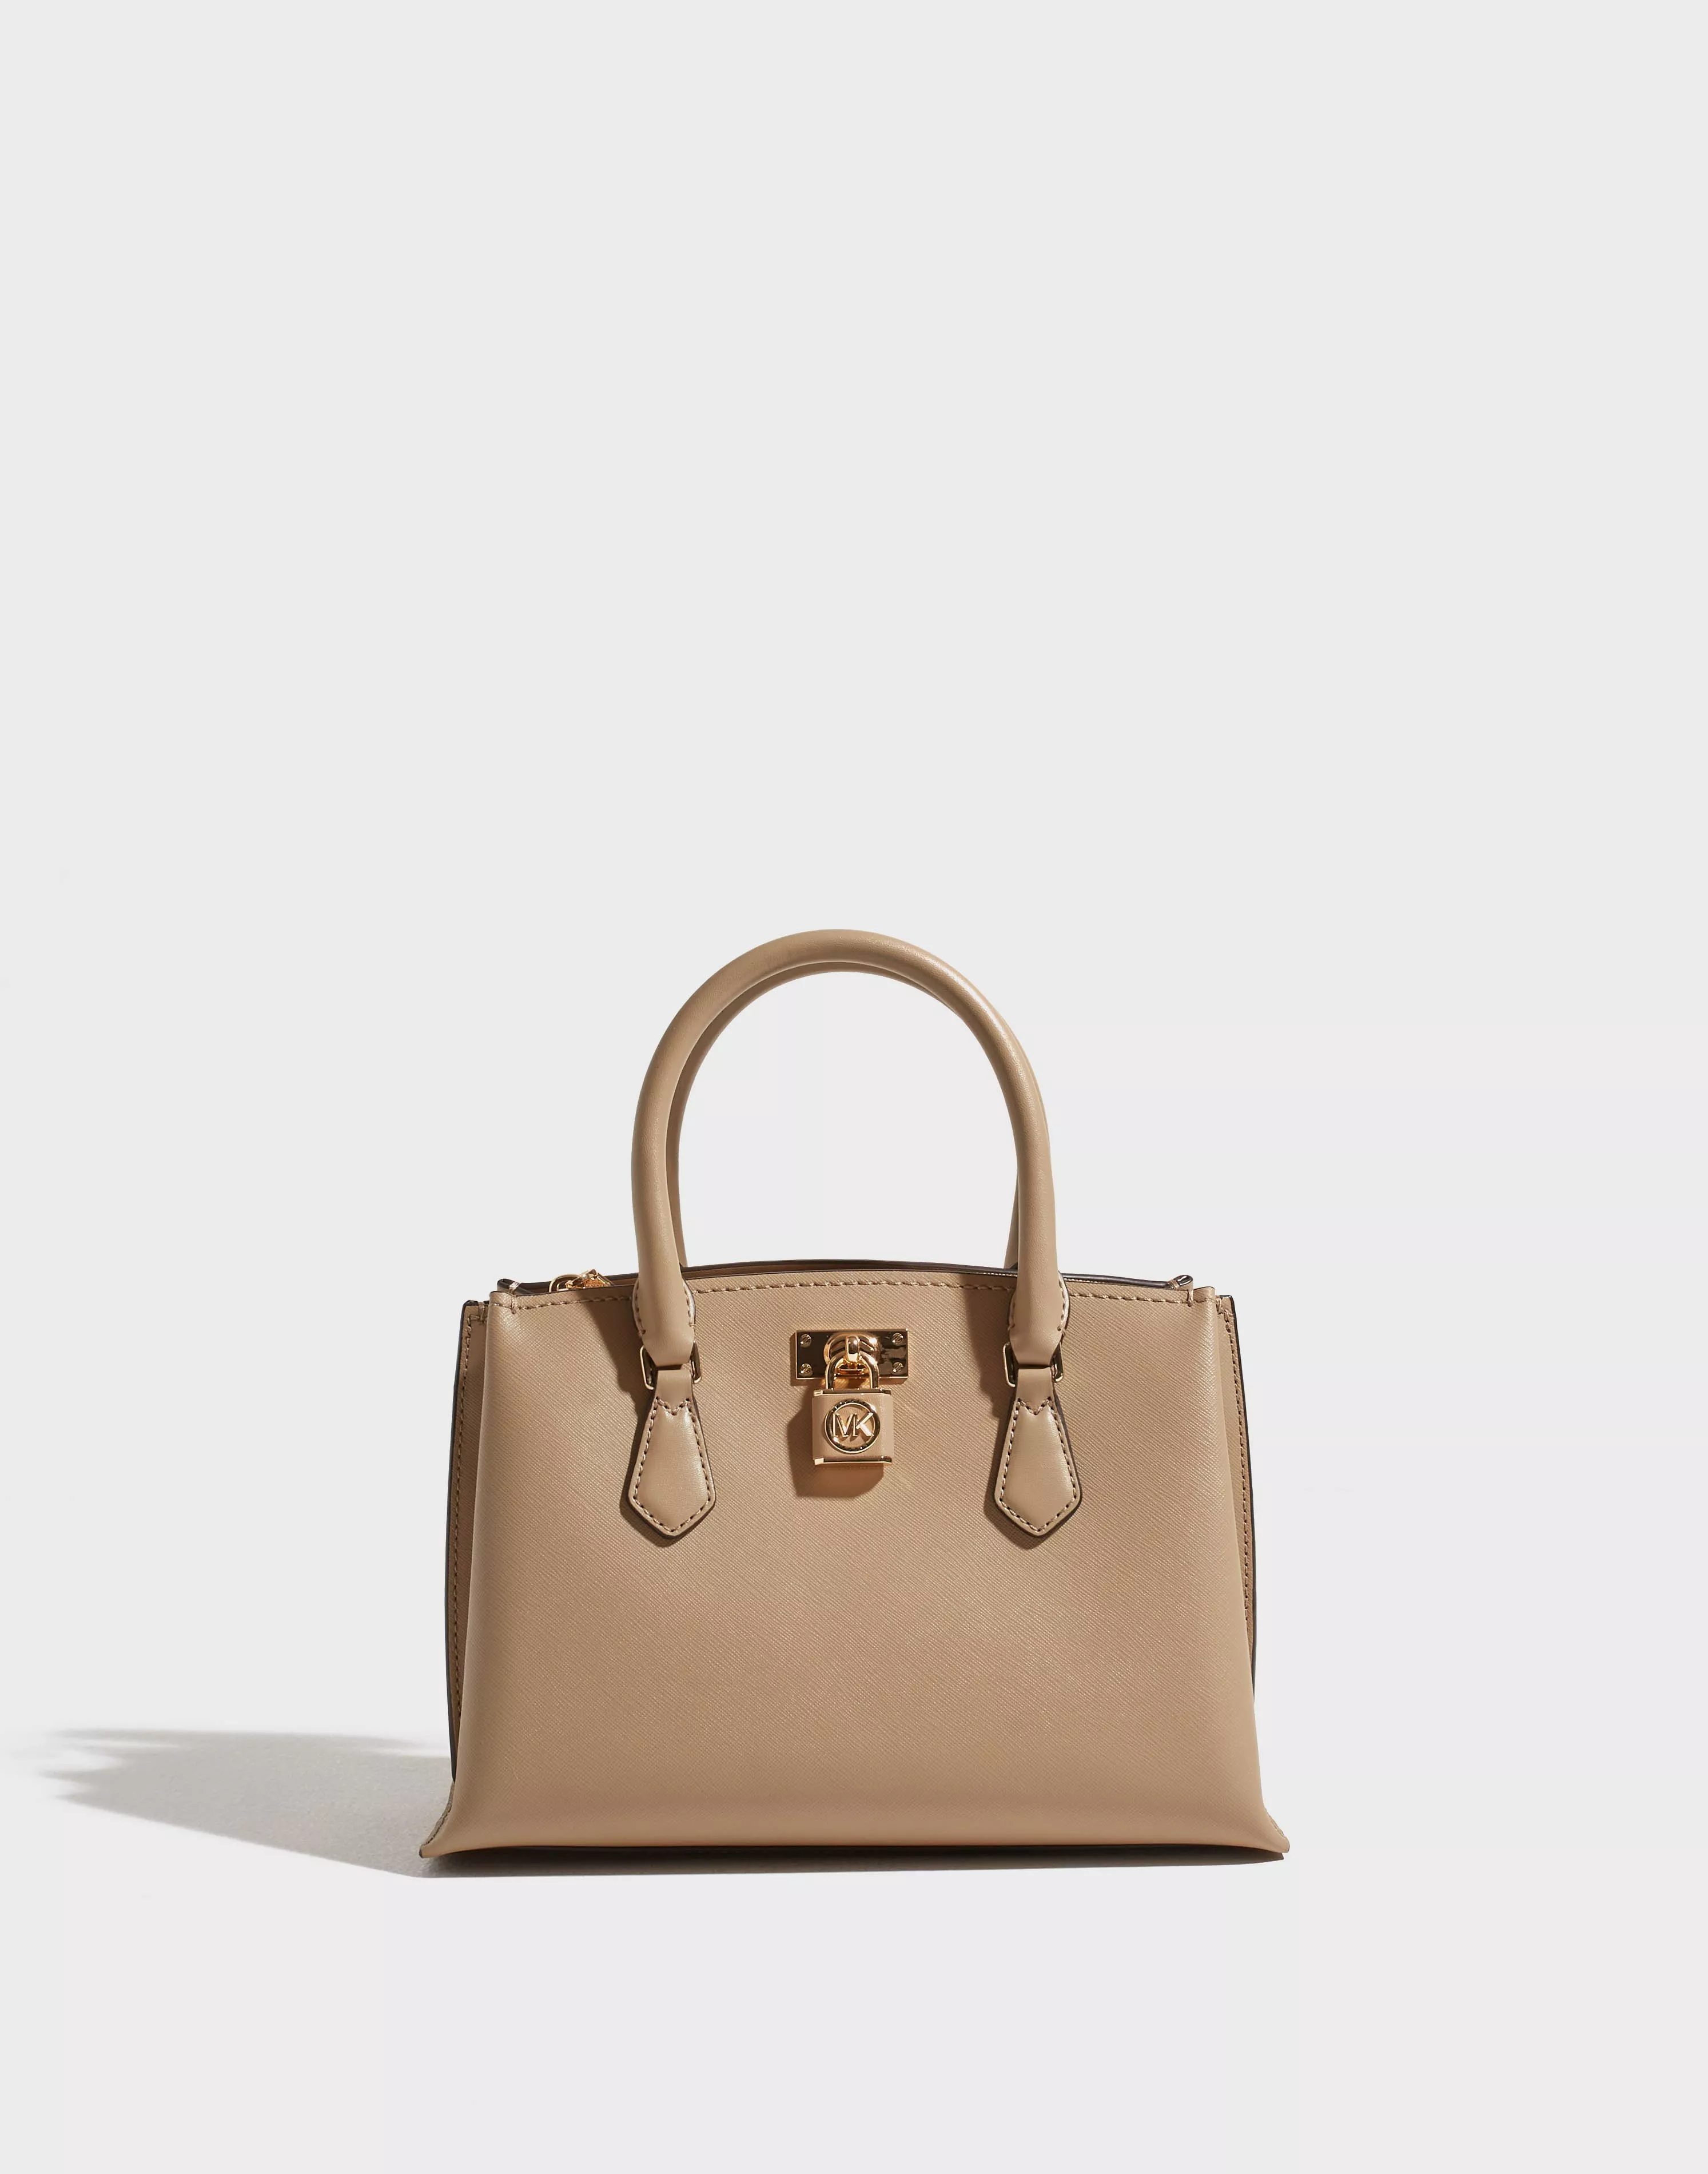 Michael Kors purse: Get up to 60% off the brand's bags and more